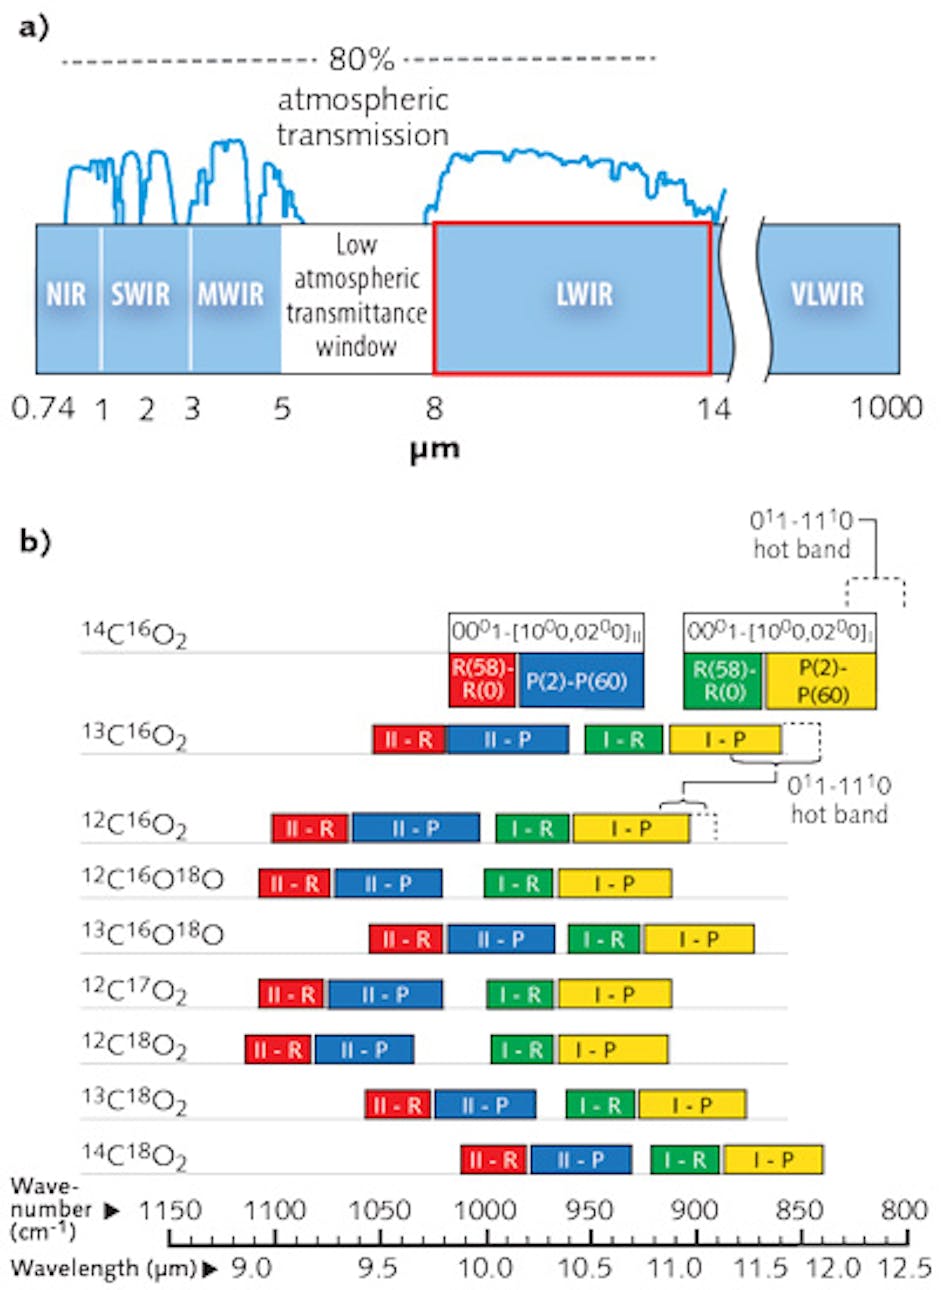 FIGURE 1. Carbon-dioxide (CO2) lasers emit in the red boxed range (a) within the electromagnetic spectrum, a common window for atmospheric transmission. The frequency and wavelength coverage is shown (b) for the lasing transitions in nine CO2 isotopes.